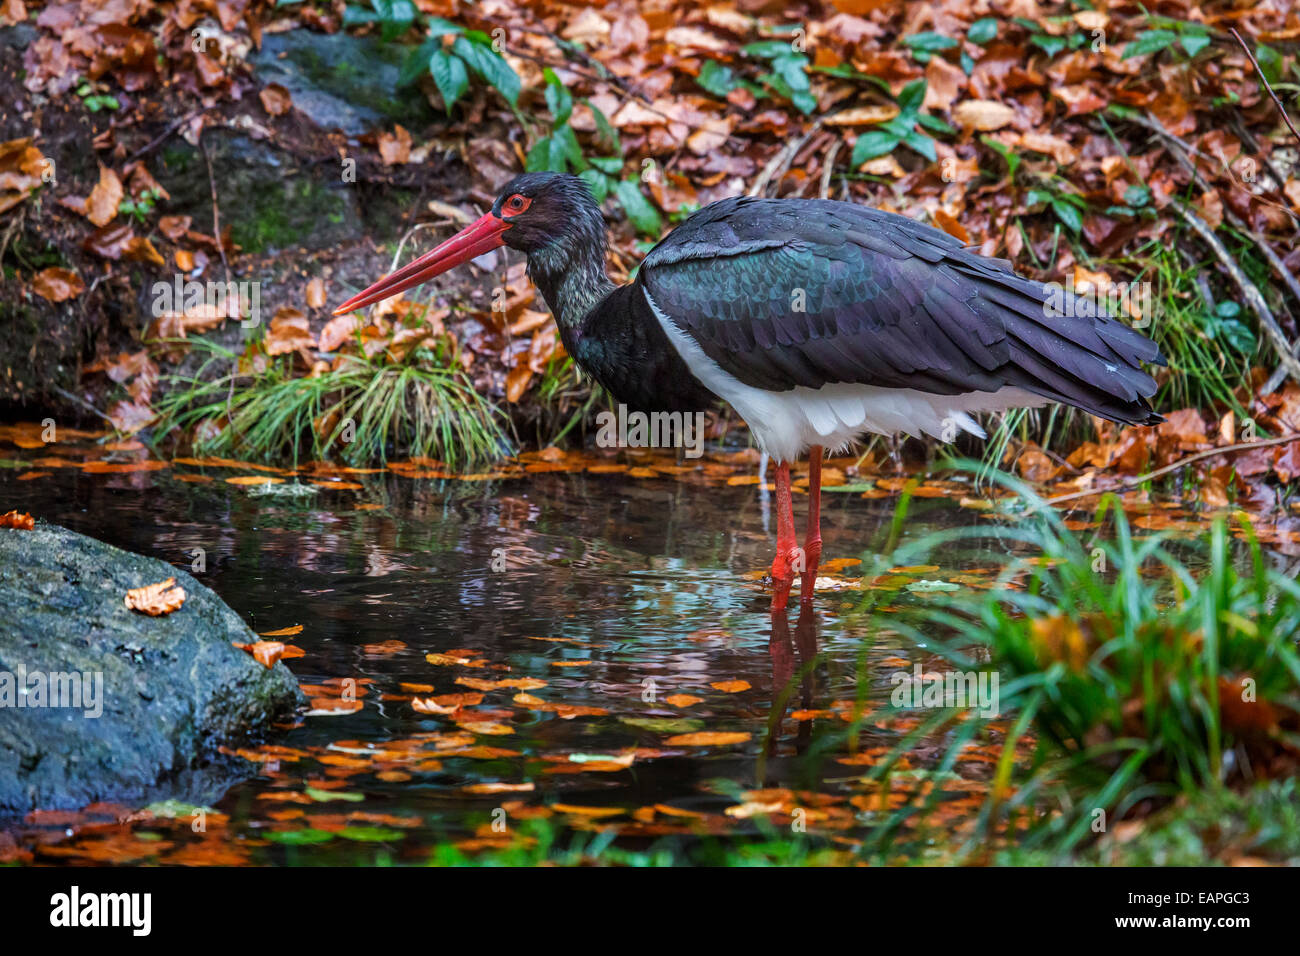 Black stork (Ciconia nigra) foraging in pond in autumn forest Stock Photo